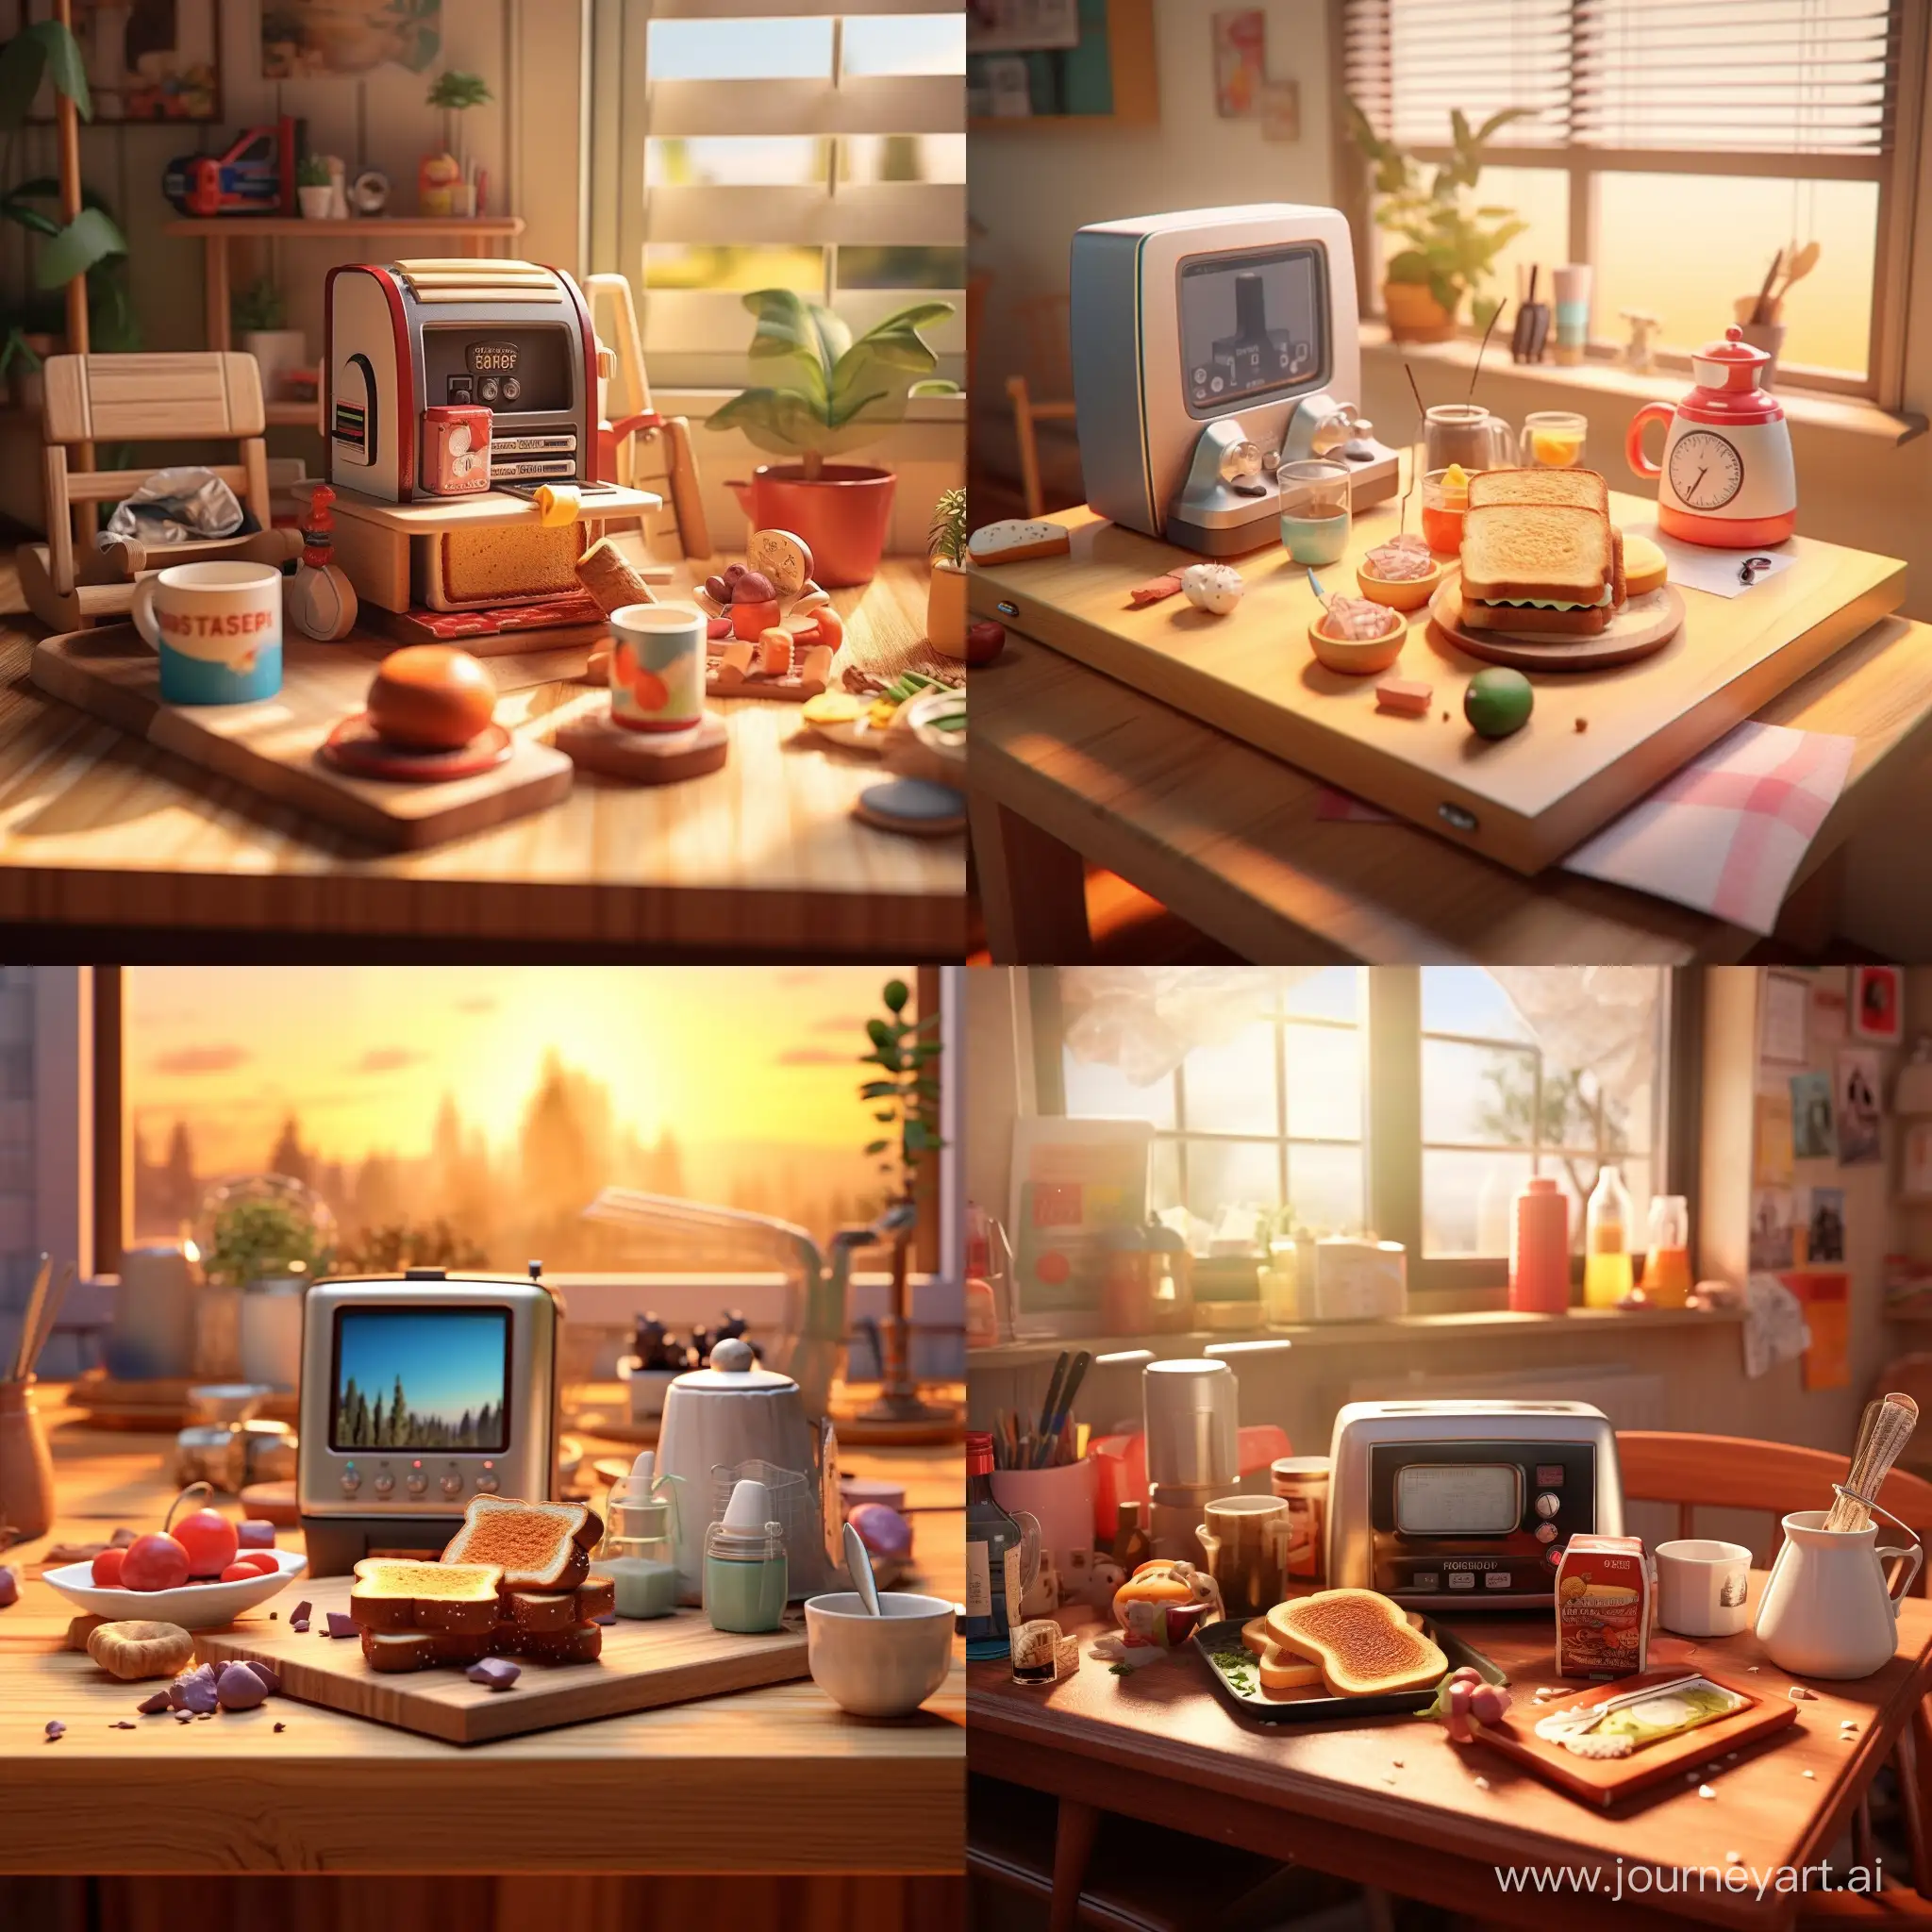 create a picture of a Sony toaster standing on a table. Two pieces of toast pop out of the toaster and are crispy toasted. On the table are jams and sandwiches and other things for a delicious breakfast